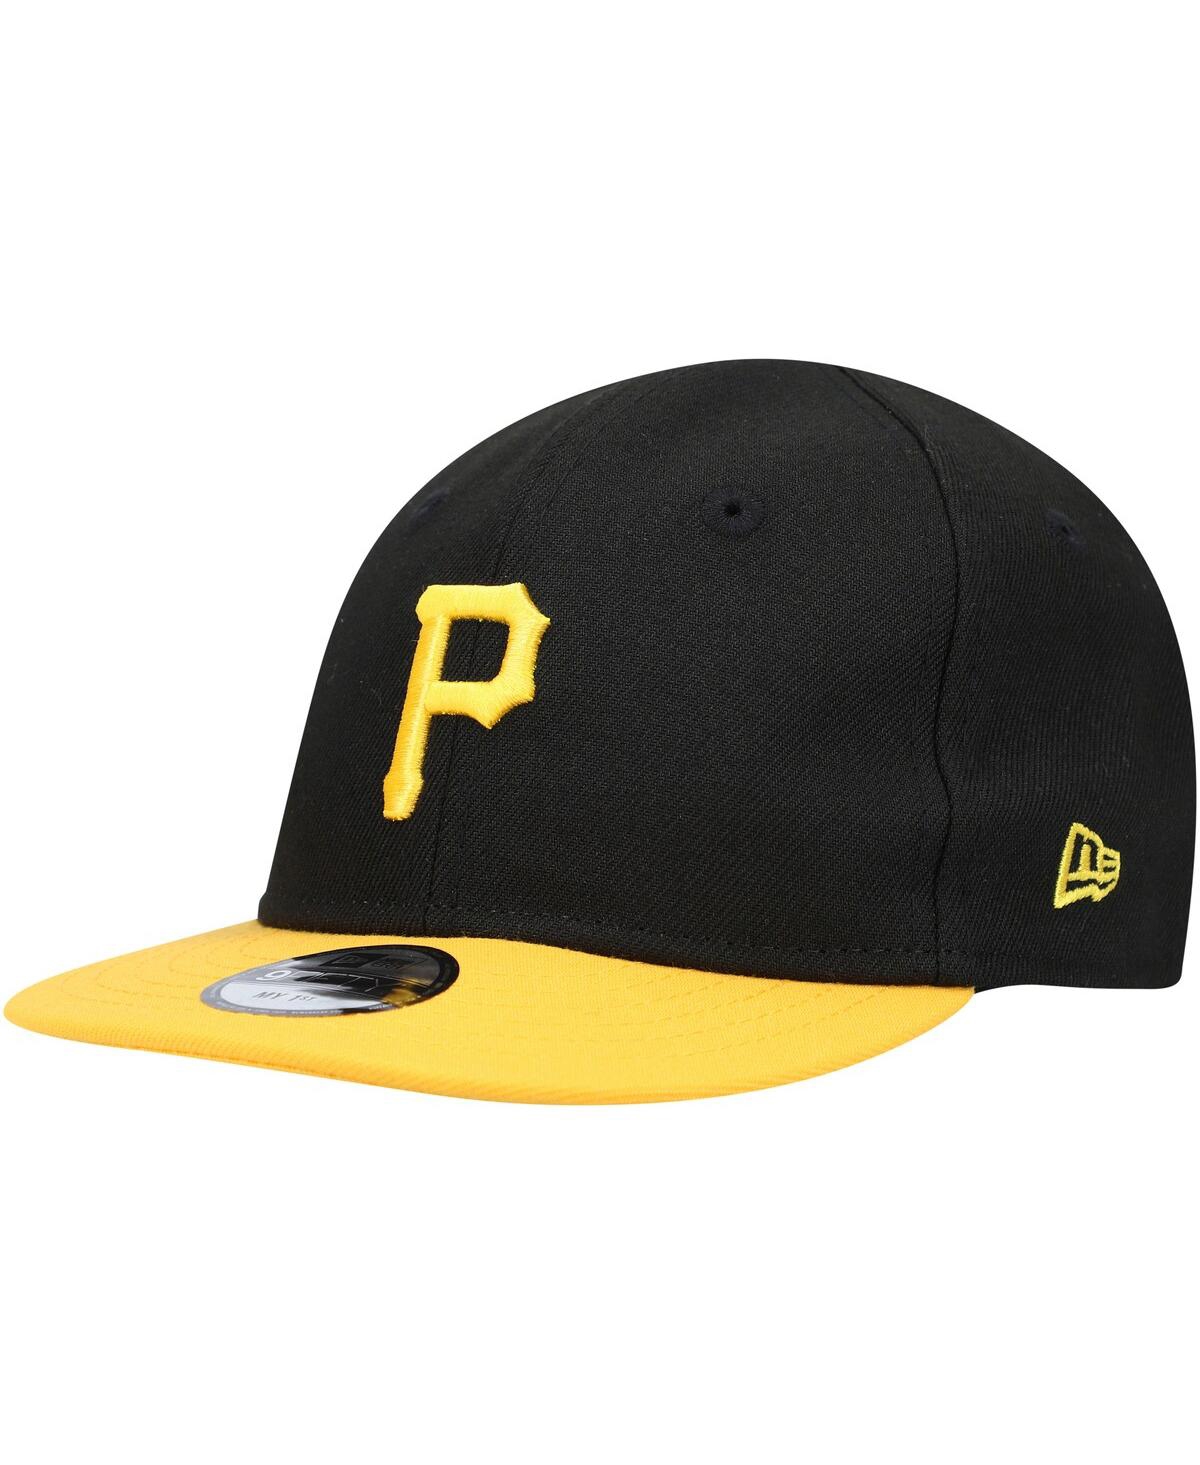 Shop New Era Infant Unisex  Black Pittsburgh Pirates My First 9fifty Hat